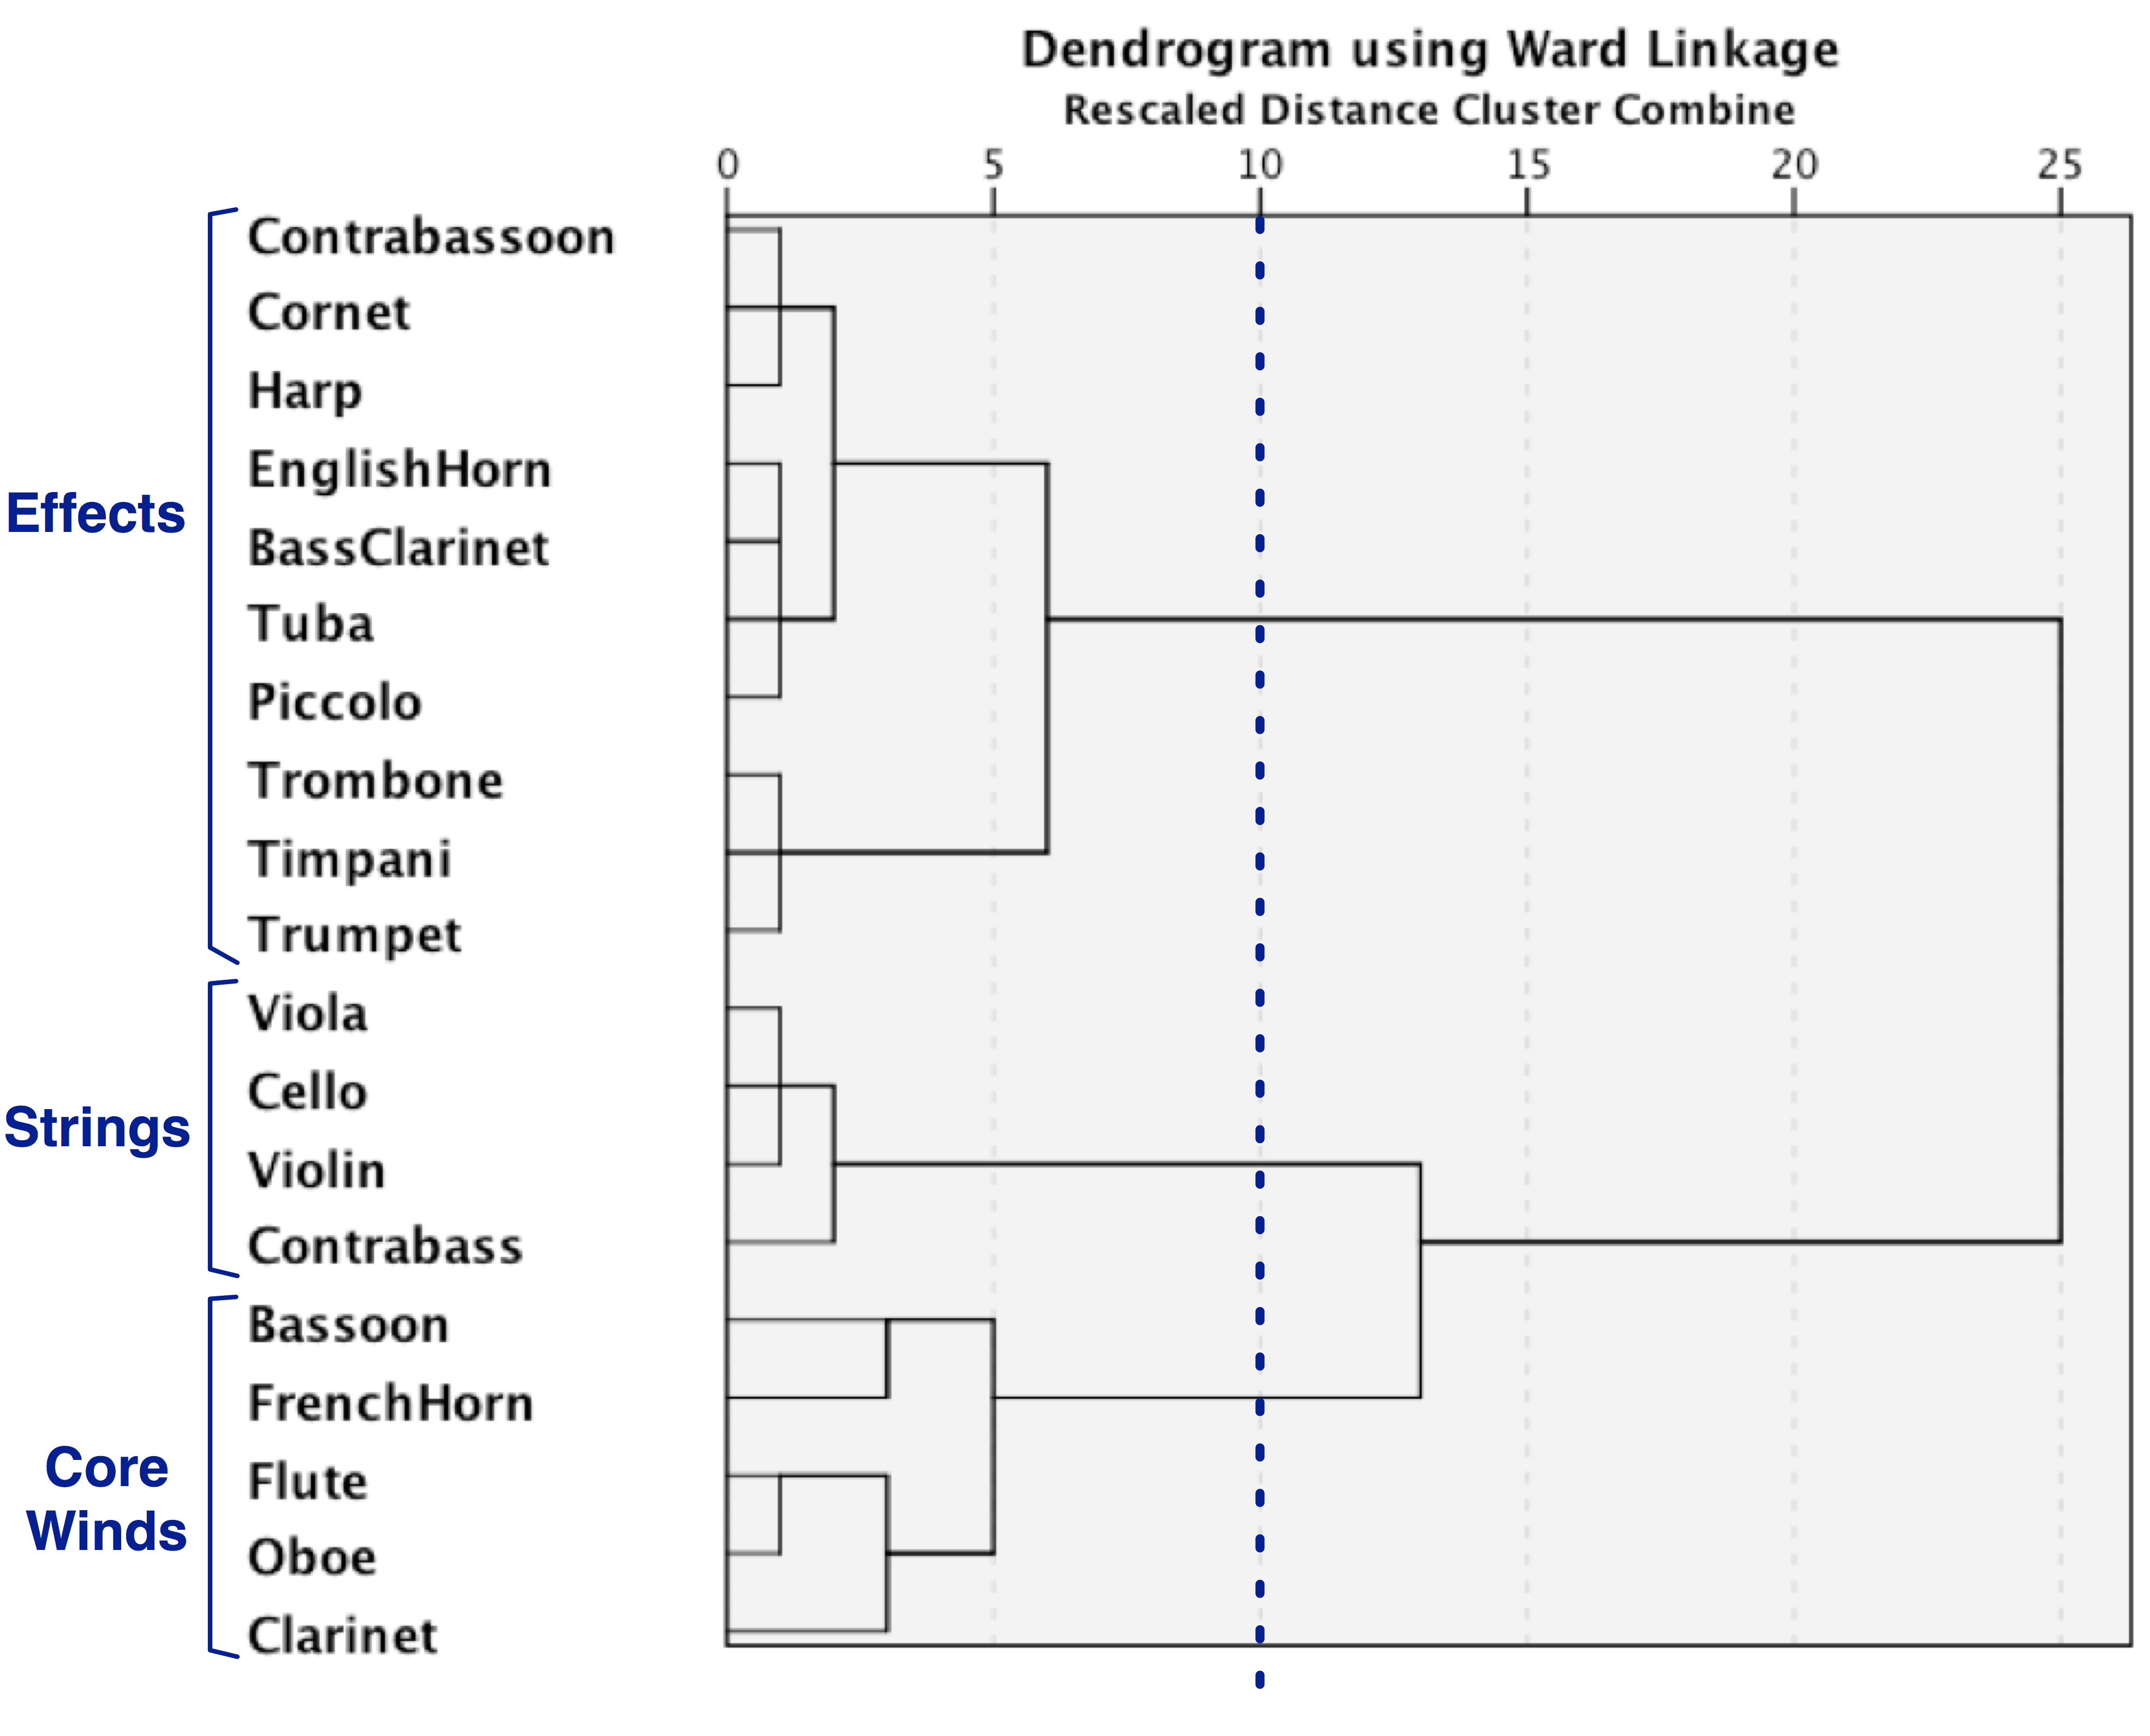 Figure 10 is a dendrogram using Ward Linkage showing hierarchical clustering of typical orchestral instruments in the 19th century